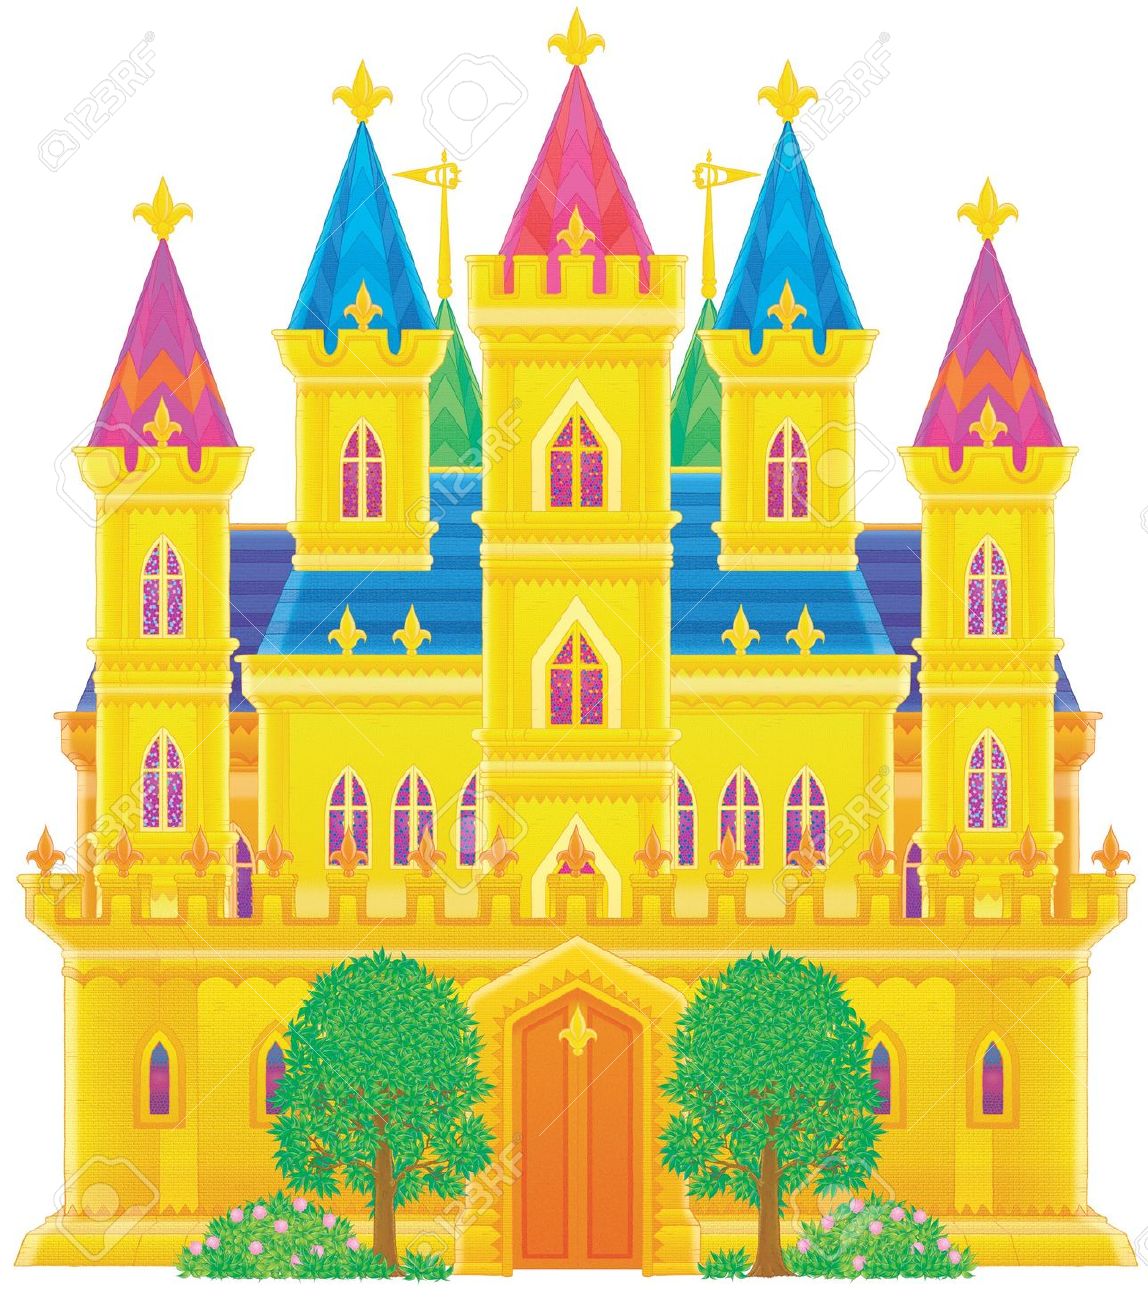 Royal palace clipart - Clipground